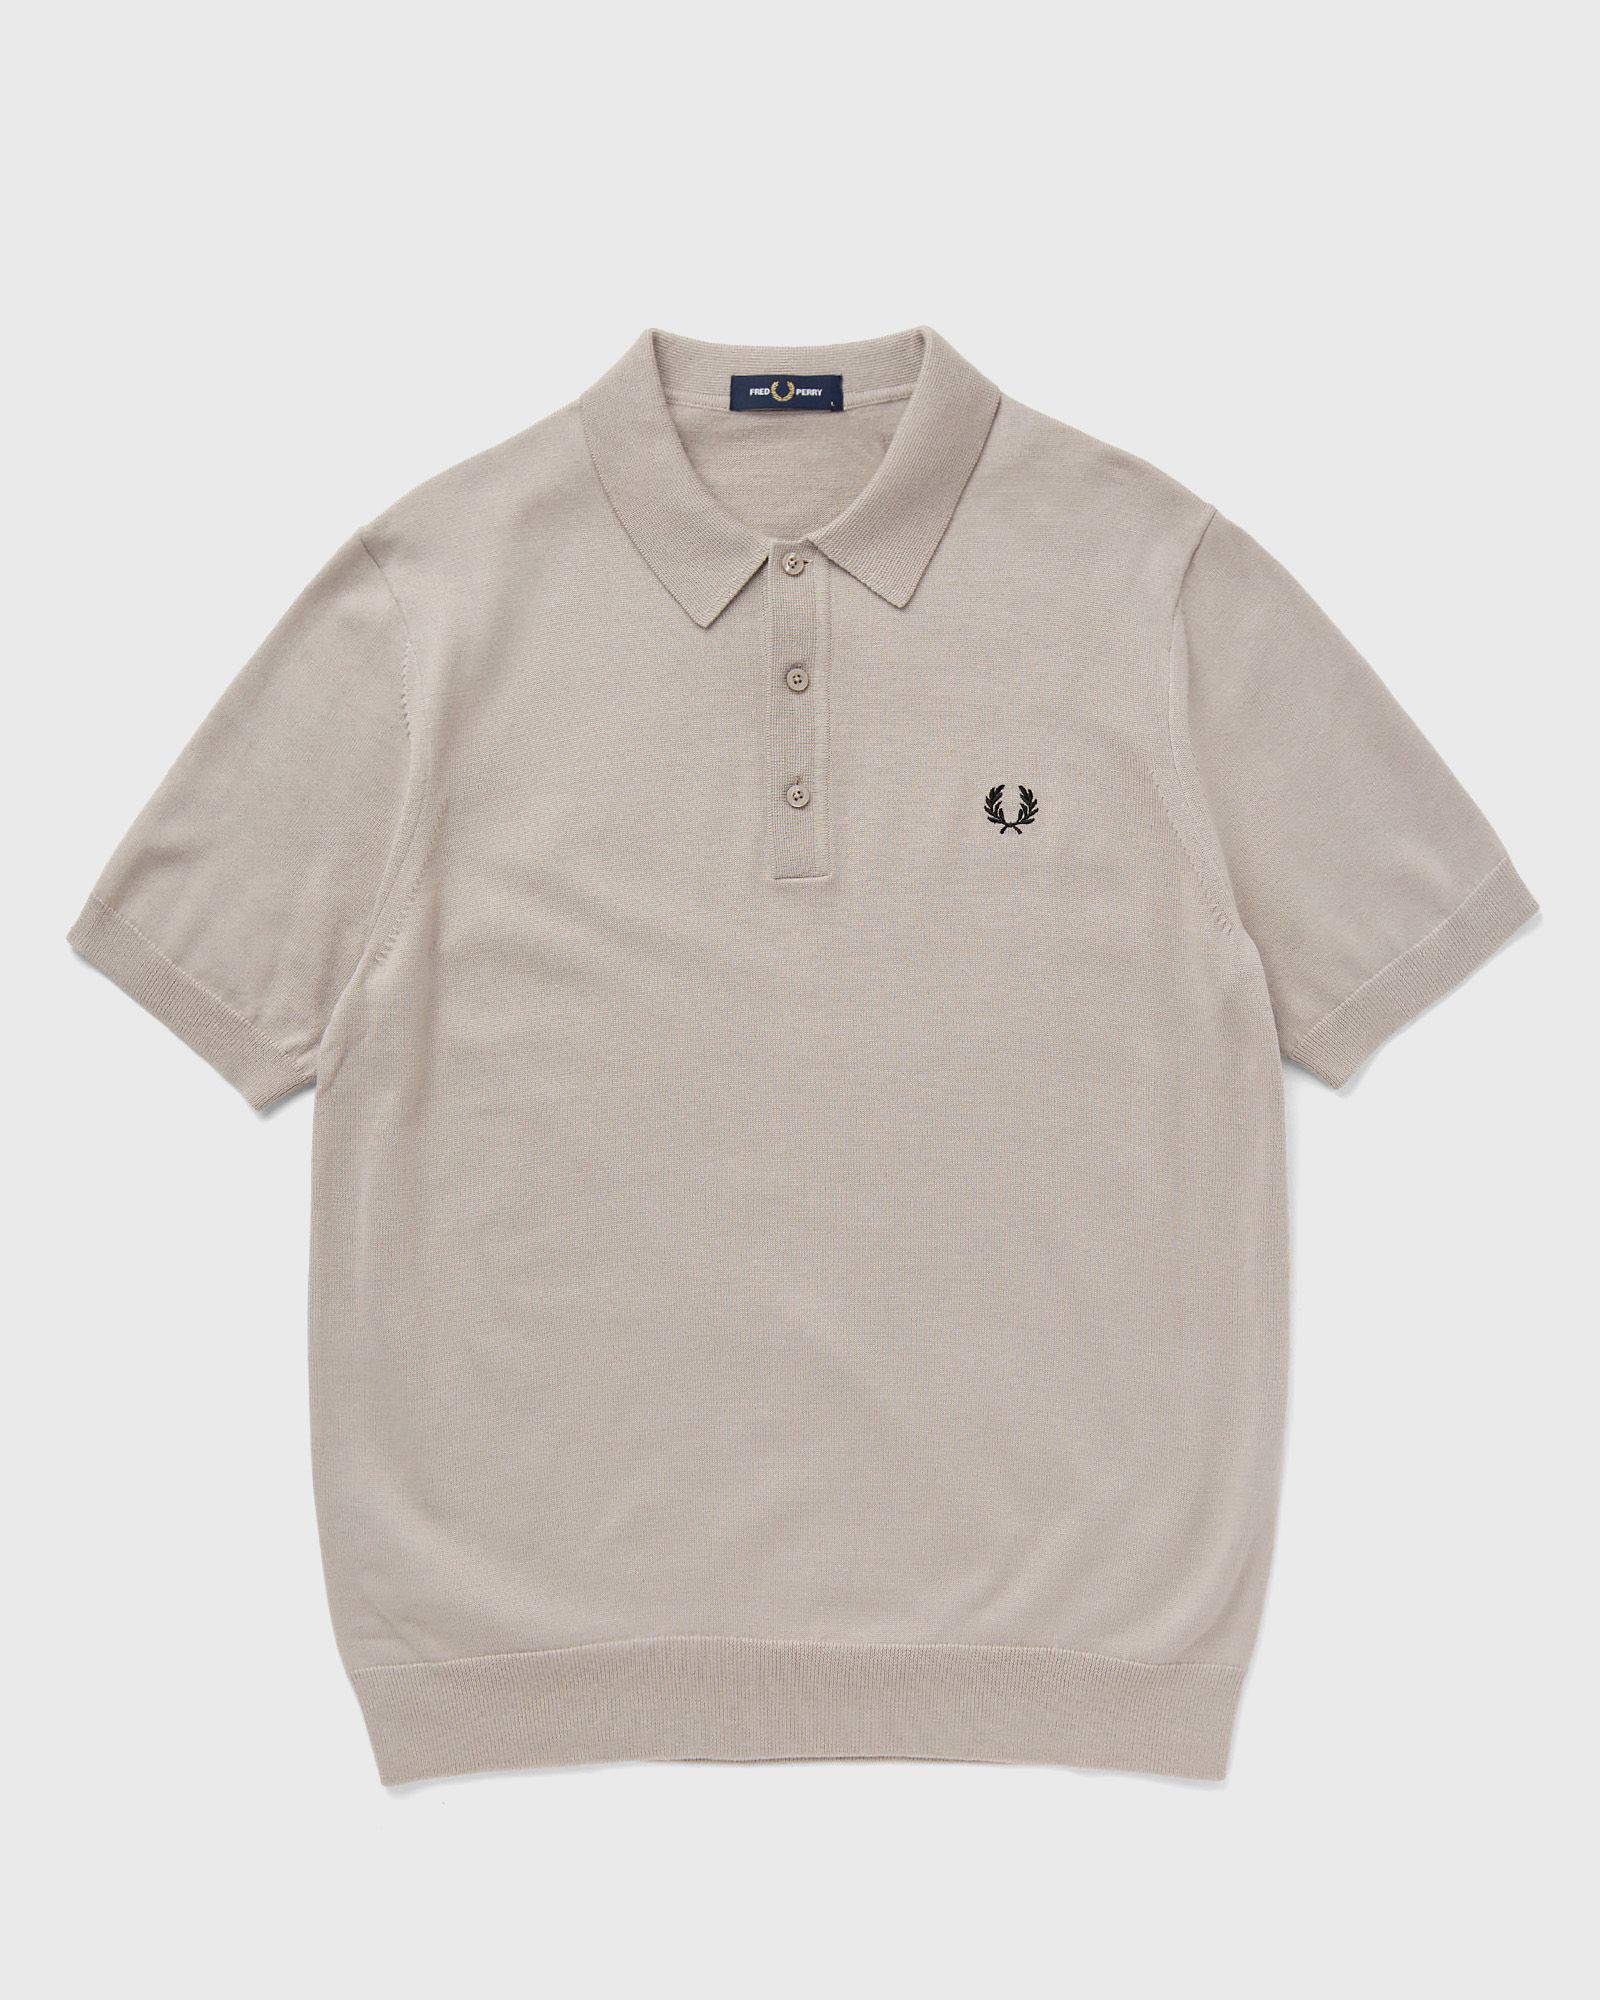 Fred Perry - classic knitted shirt men polos white in größe:xl